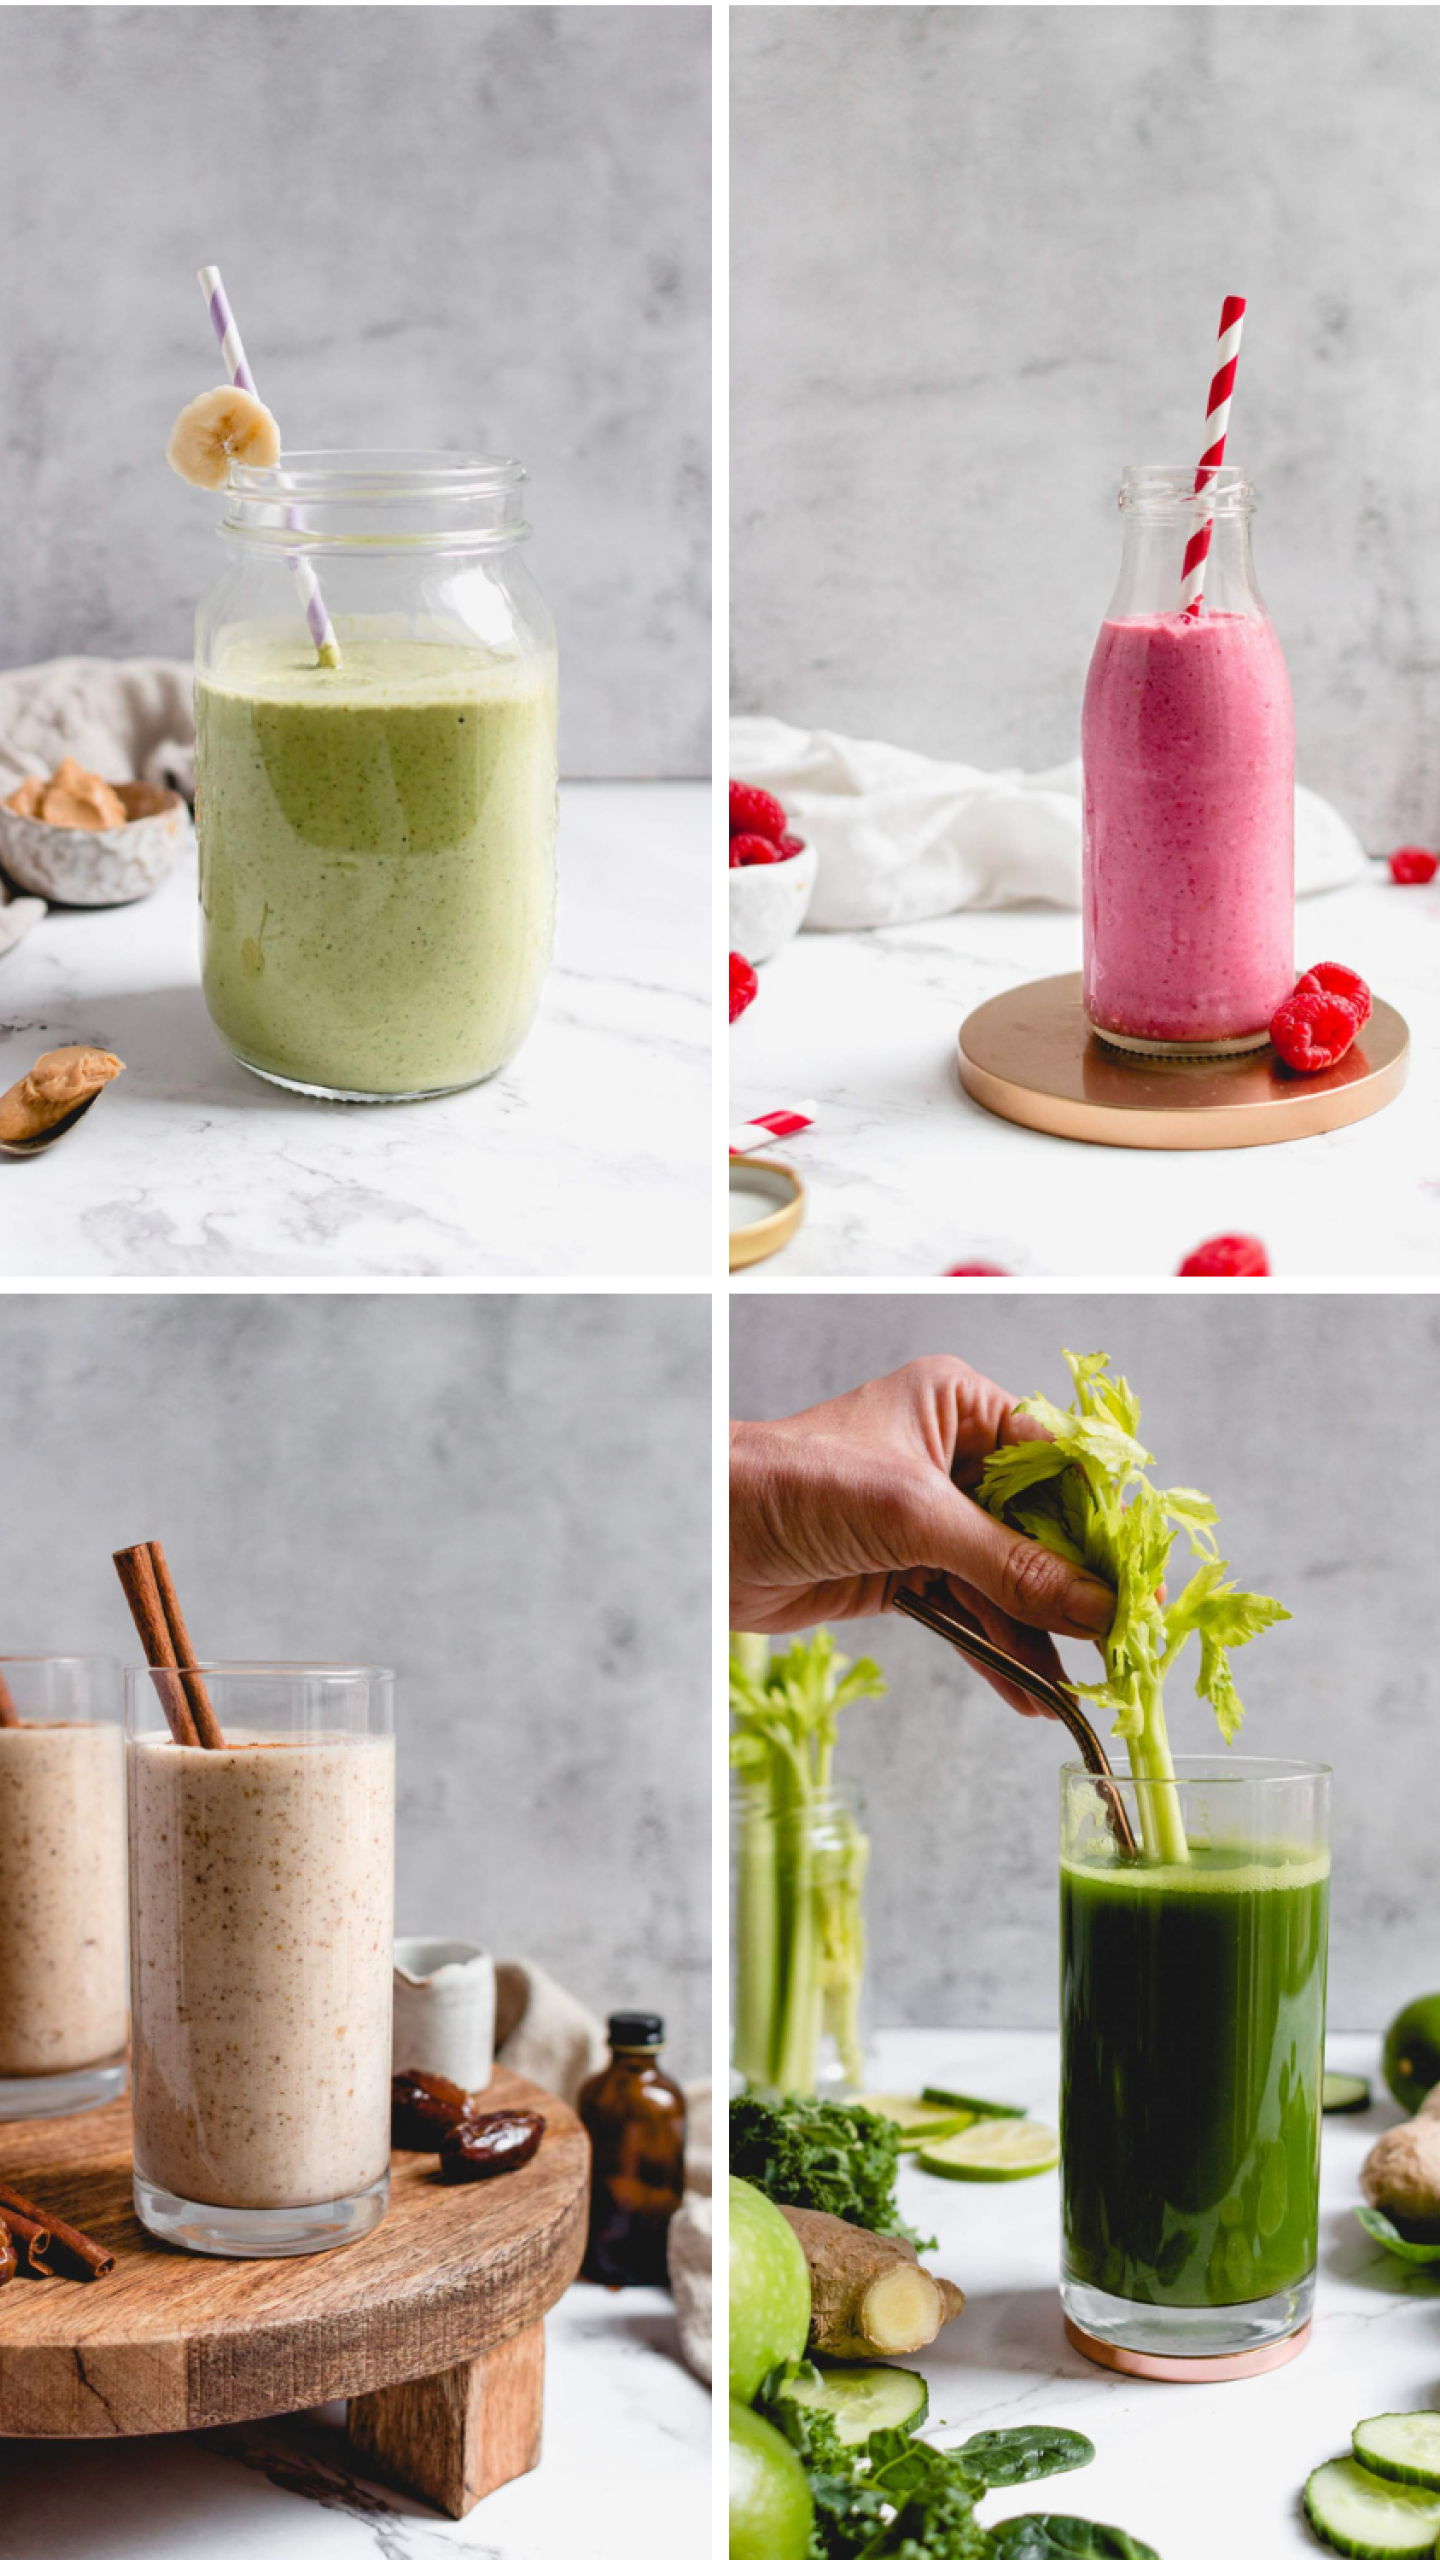 https://www.slenderkitchen.com/sites/default/files/styles/gws_1440/public/how-to-make-smoothies-5.png